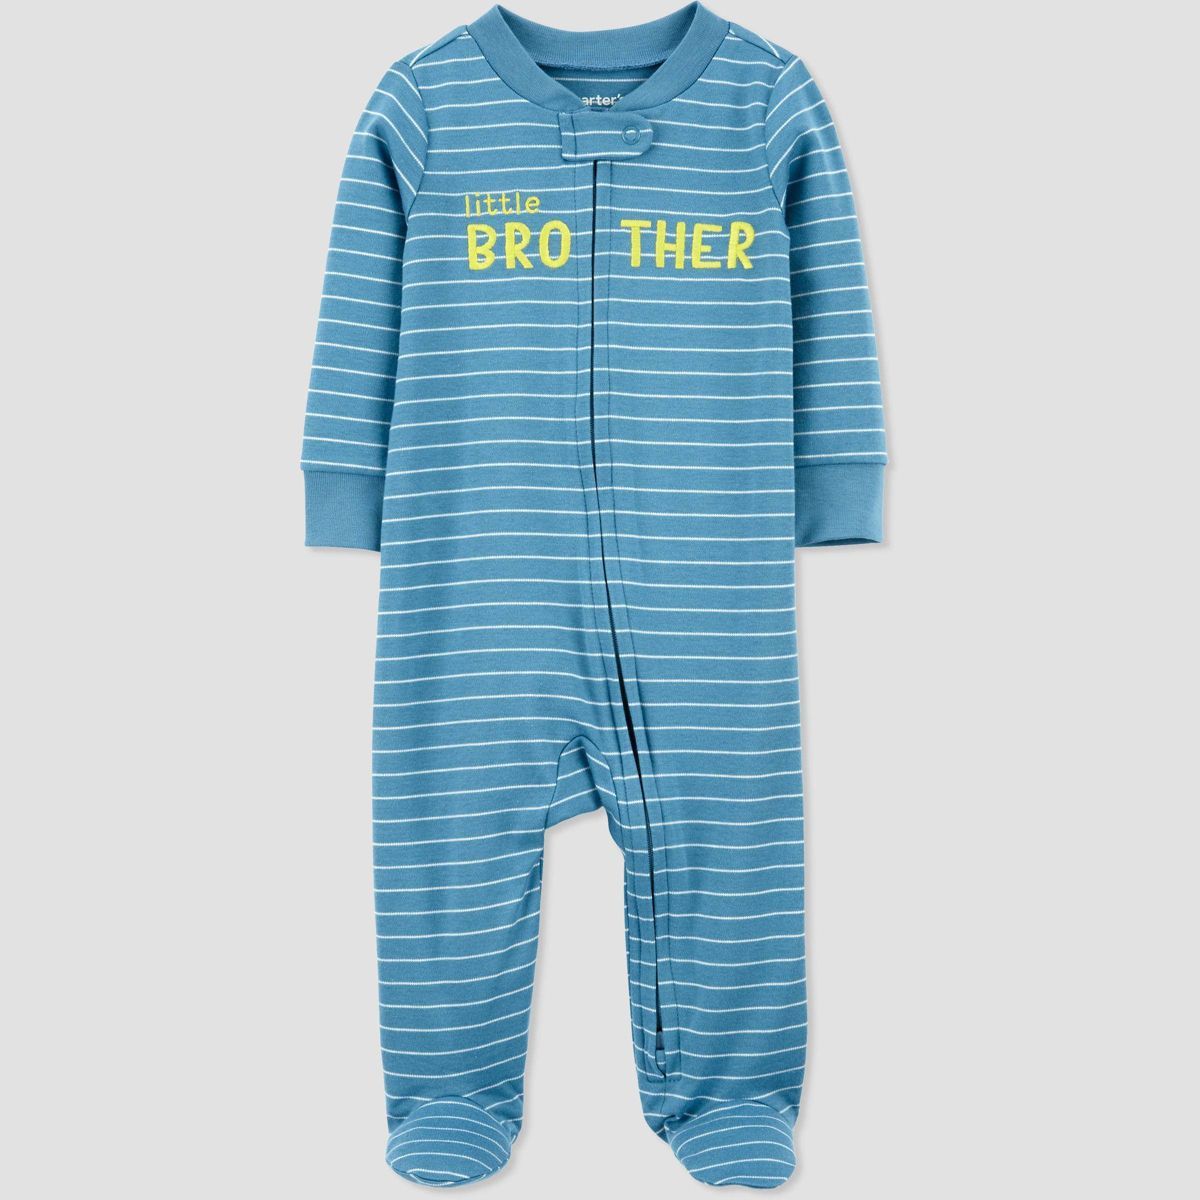 Carter's Just One You® Baby Boys' Little Brother Footed Pajama - Blue | Target